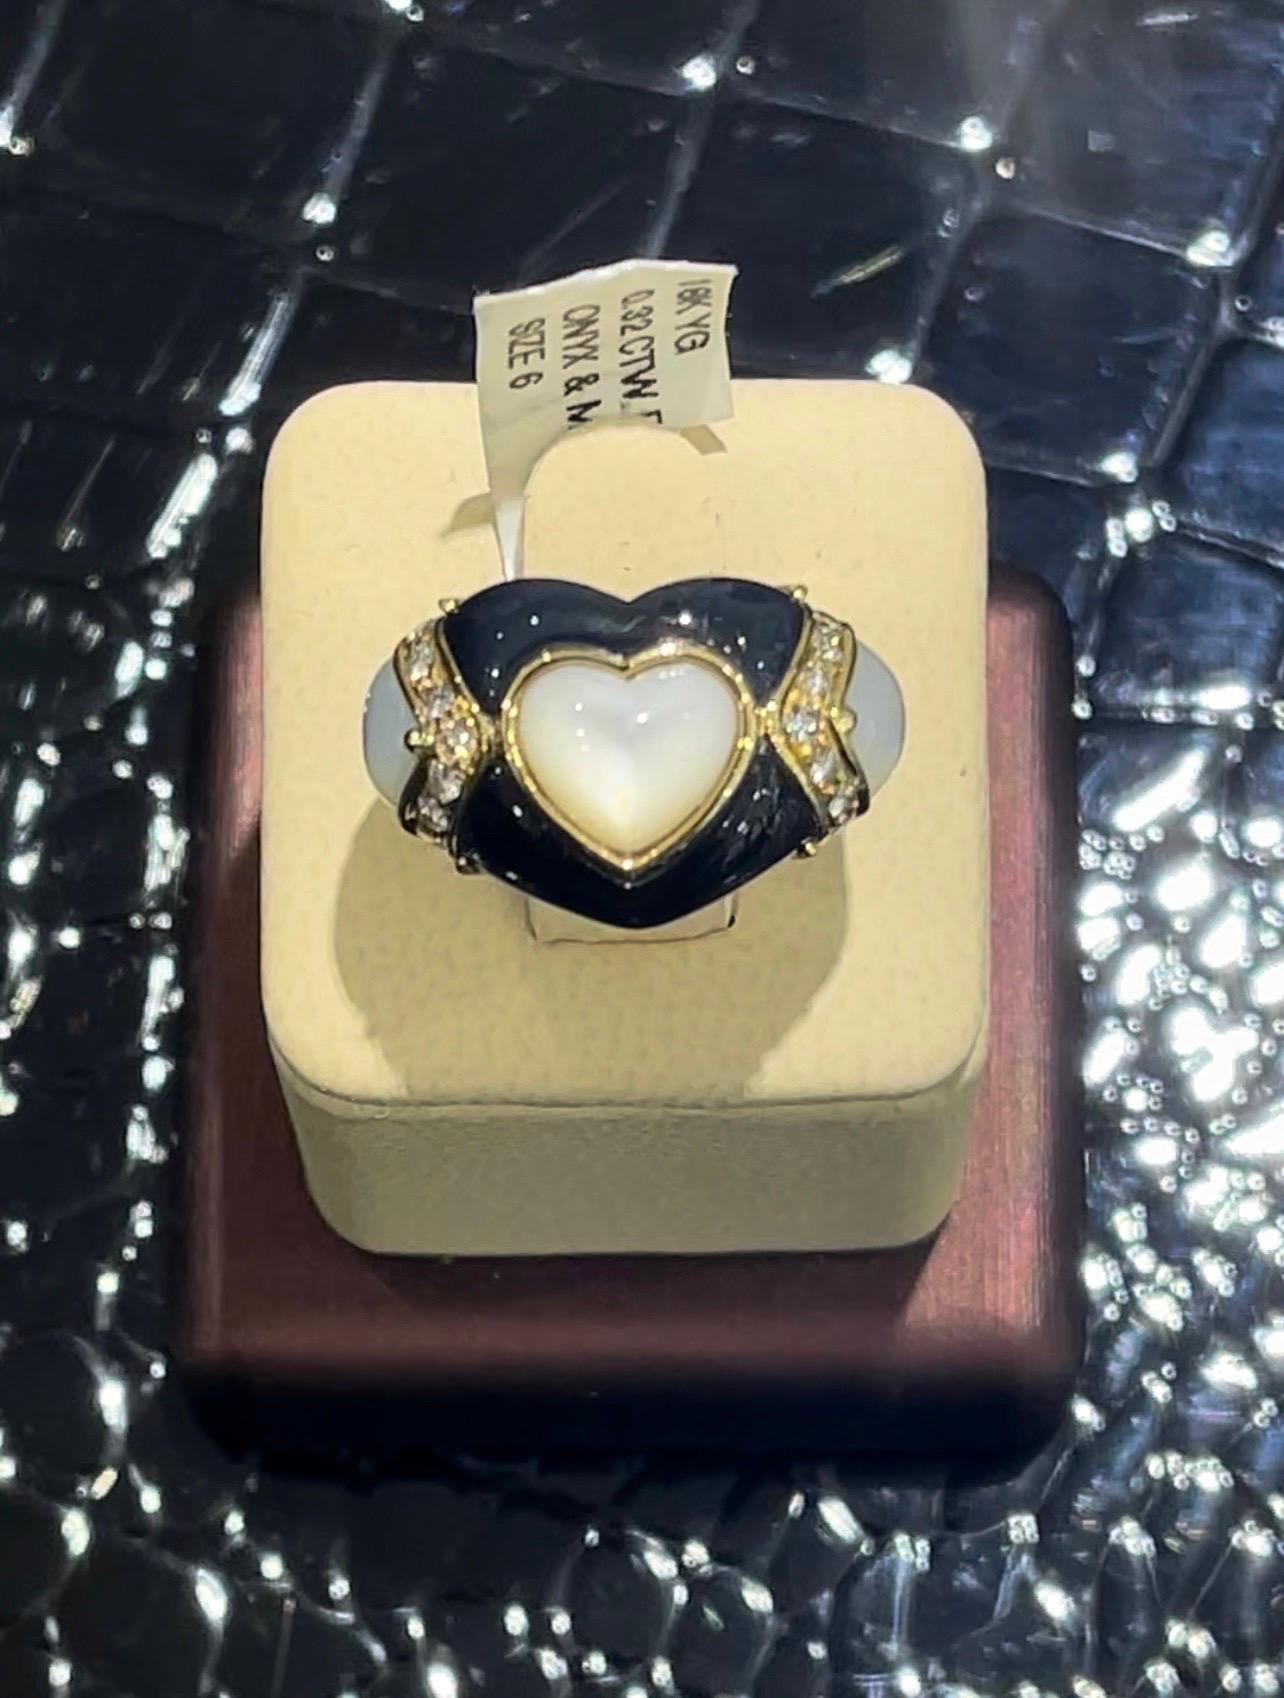 Stunning Onyx, Mother Of Pearl And Diamond Heart Ring In 18k,

0.32 carats in diamonds,

Size 6